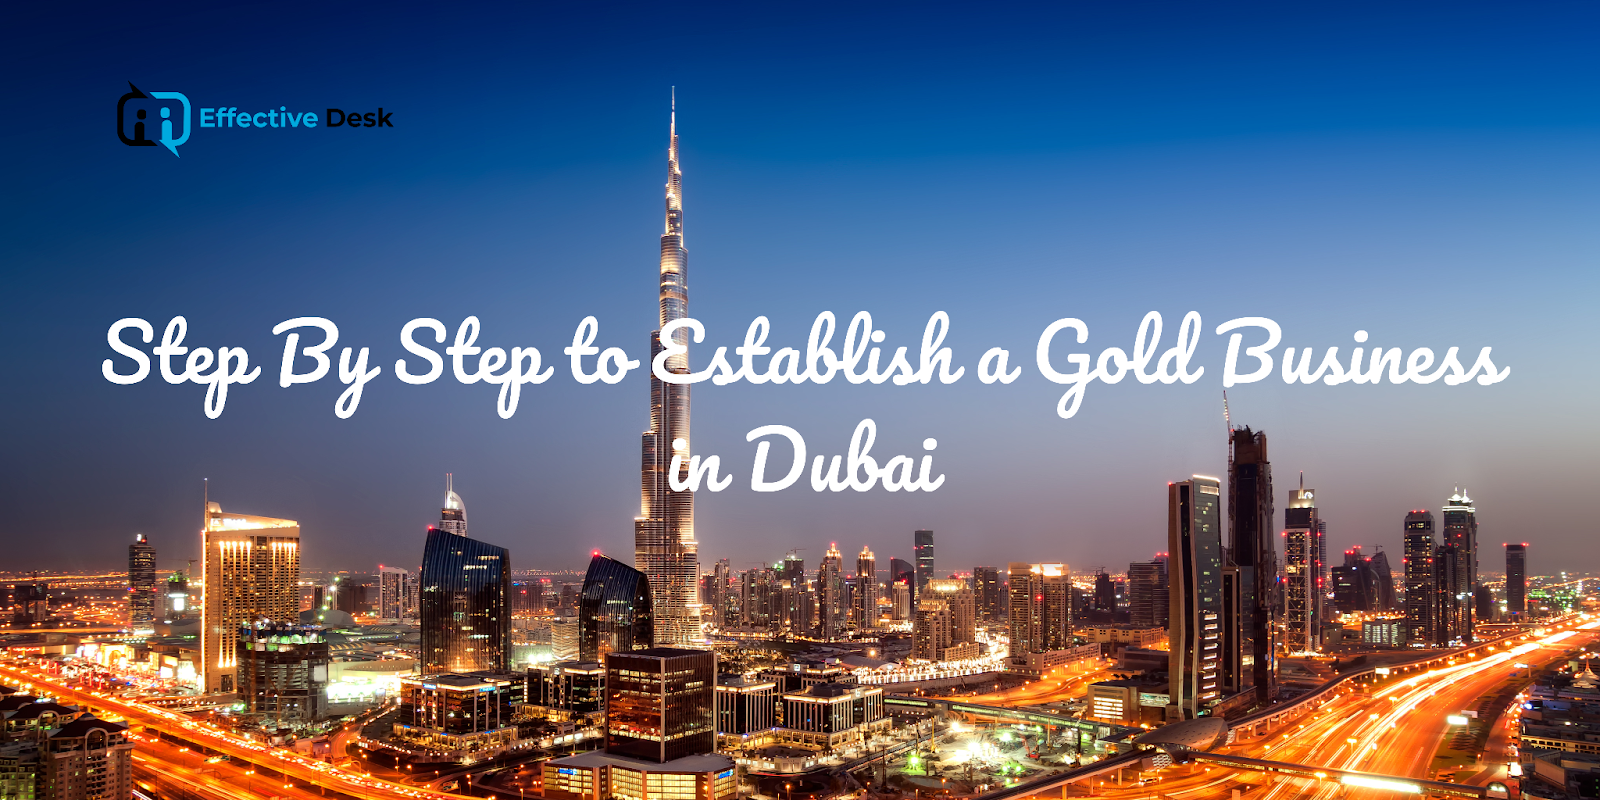 Step By Step to Establish a Gold Business in Dubai